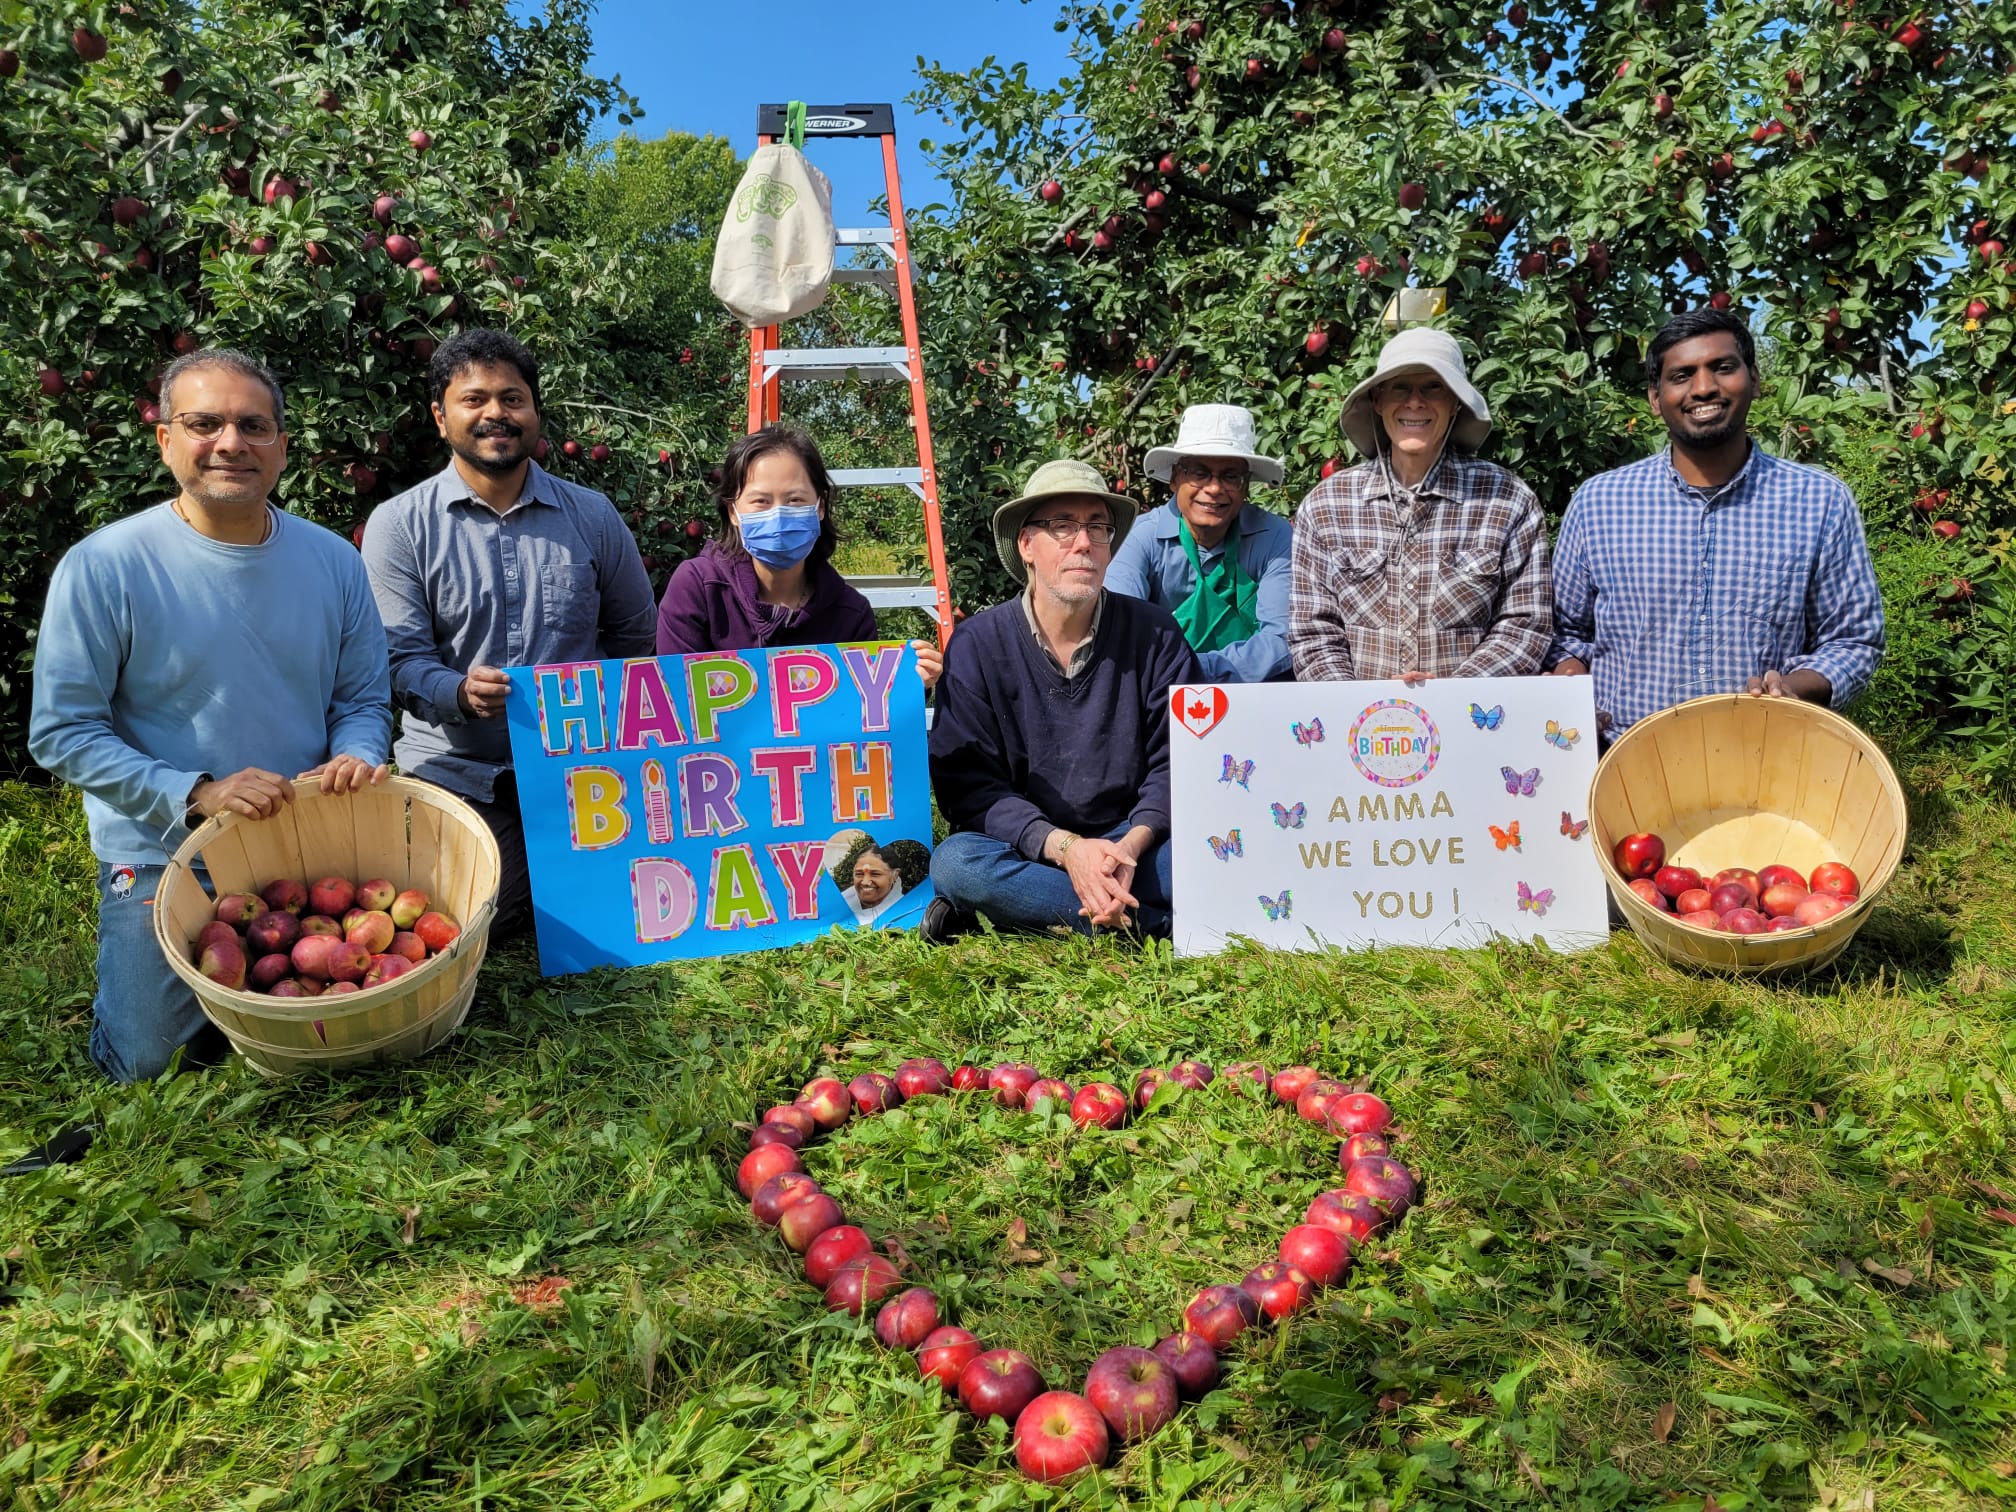 Volunteers in orchard with heart made of apples and signs that read 'Happy Birthday, Amma! We love you!"